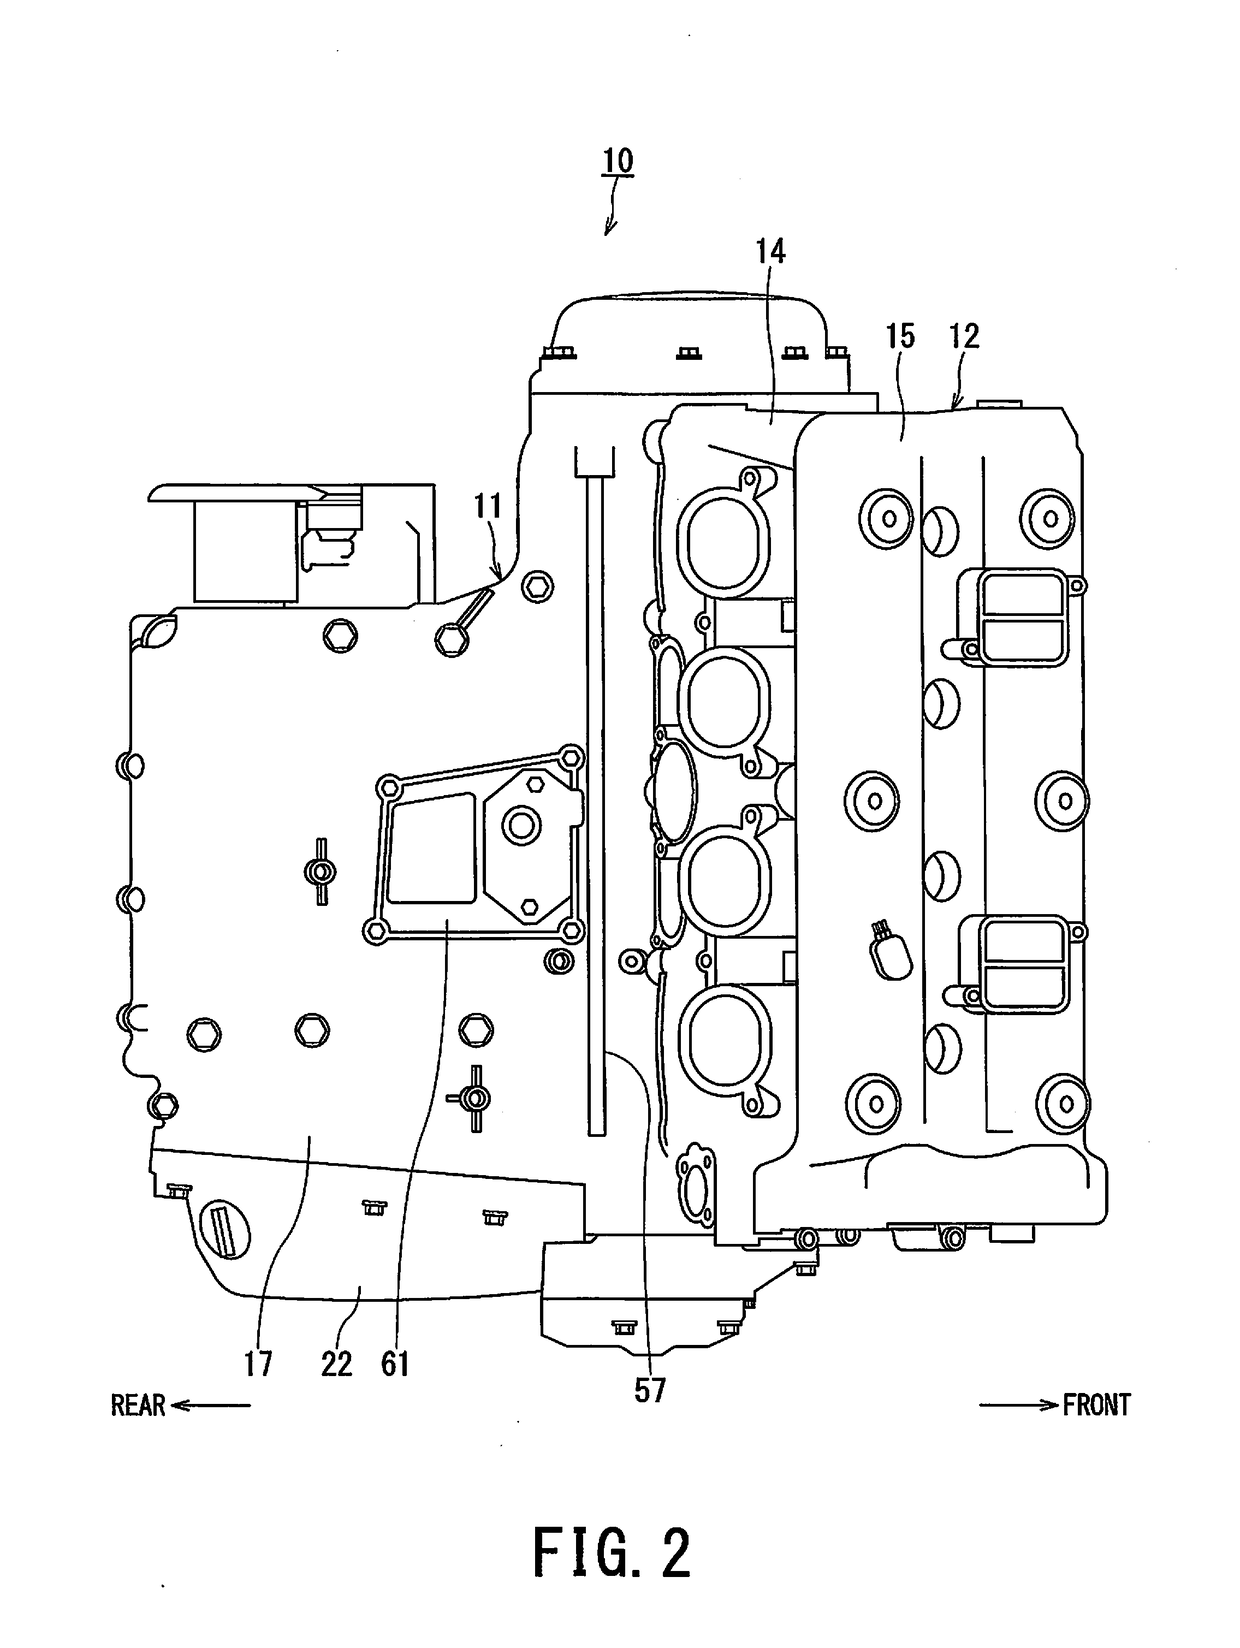 Lubrication structure for internal combustion engine